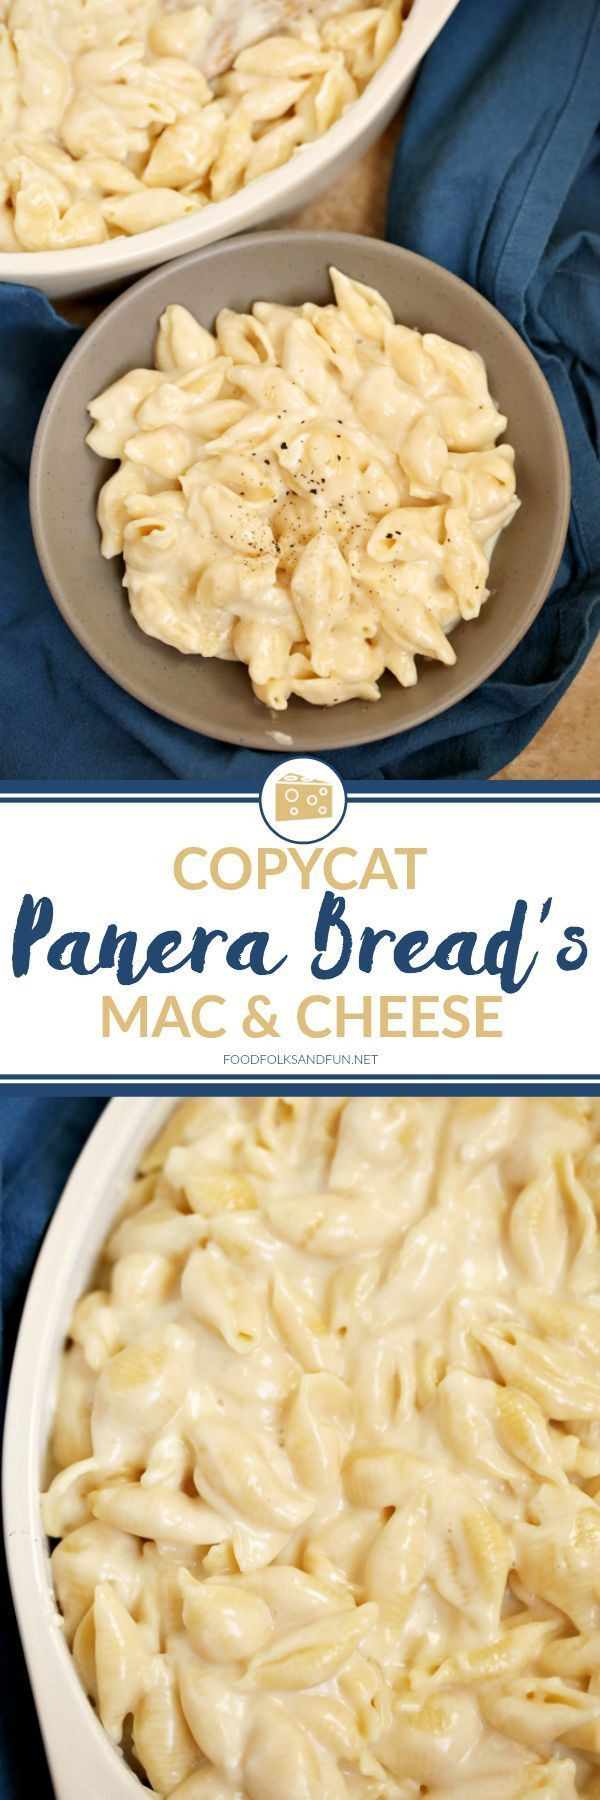 Panera Bread Mac N Cheese Recipe
 990 best images about Mac n Cheez on Pinterest